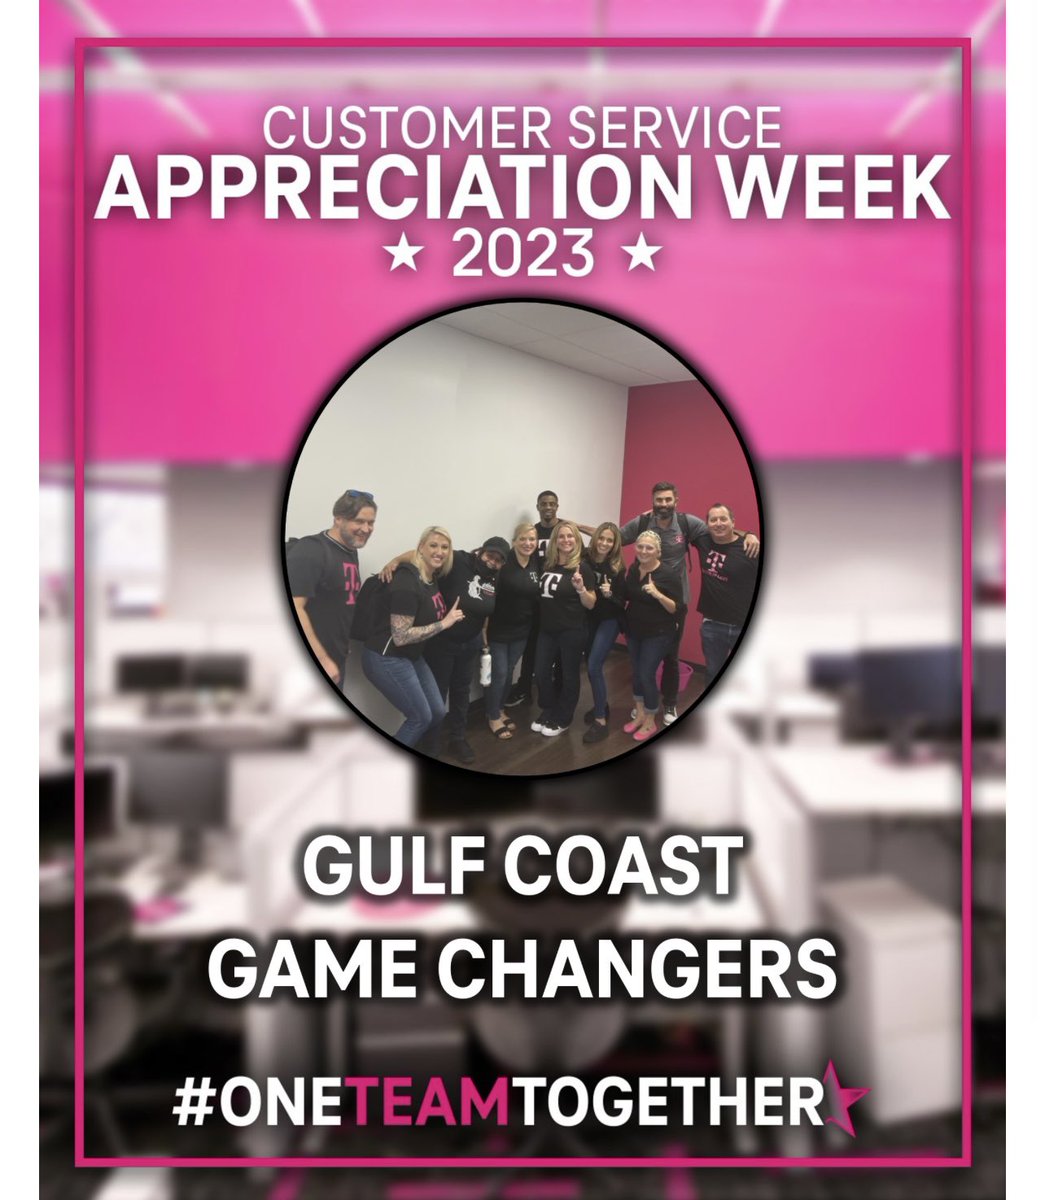 Time to send some appreciation to this amazing team of Game Changers that lead and inspire daily and are the true definition of we won’t stop! Grateful to get to collaborate with them every single day! #GoGrowWin